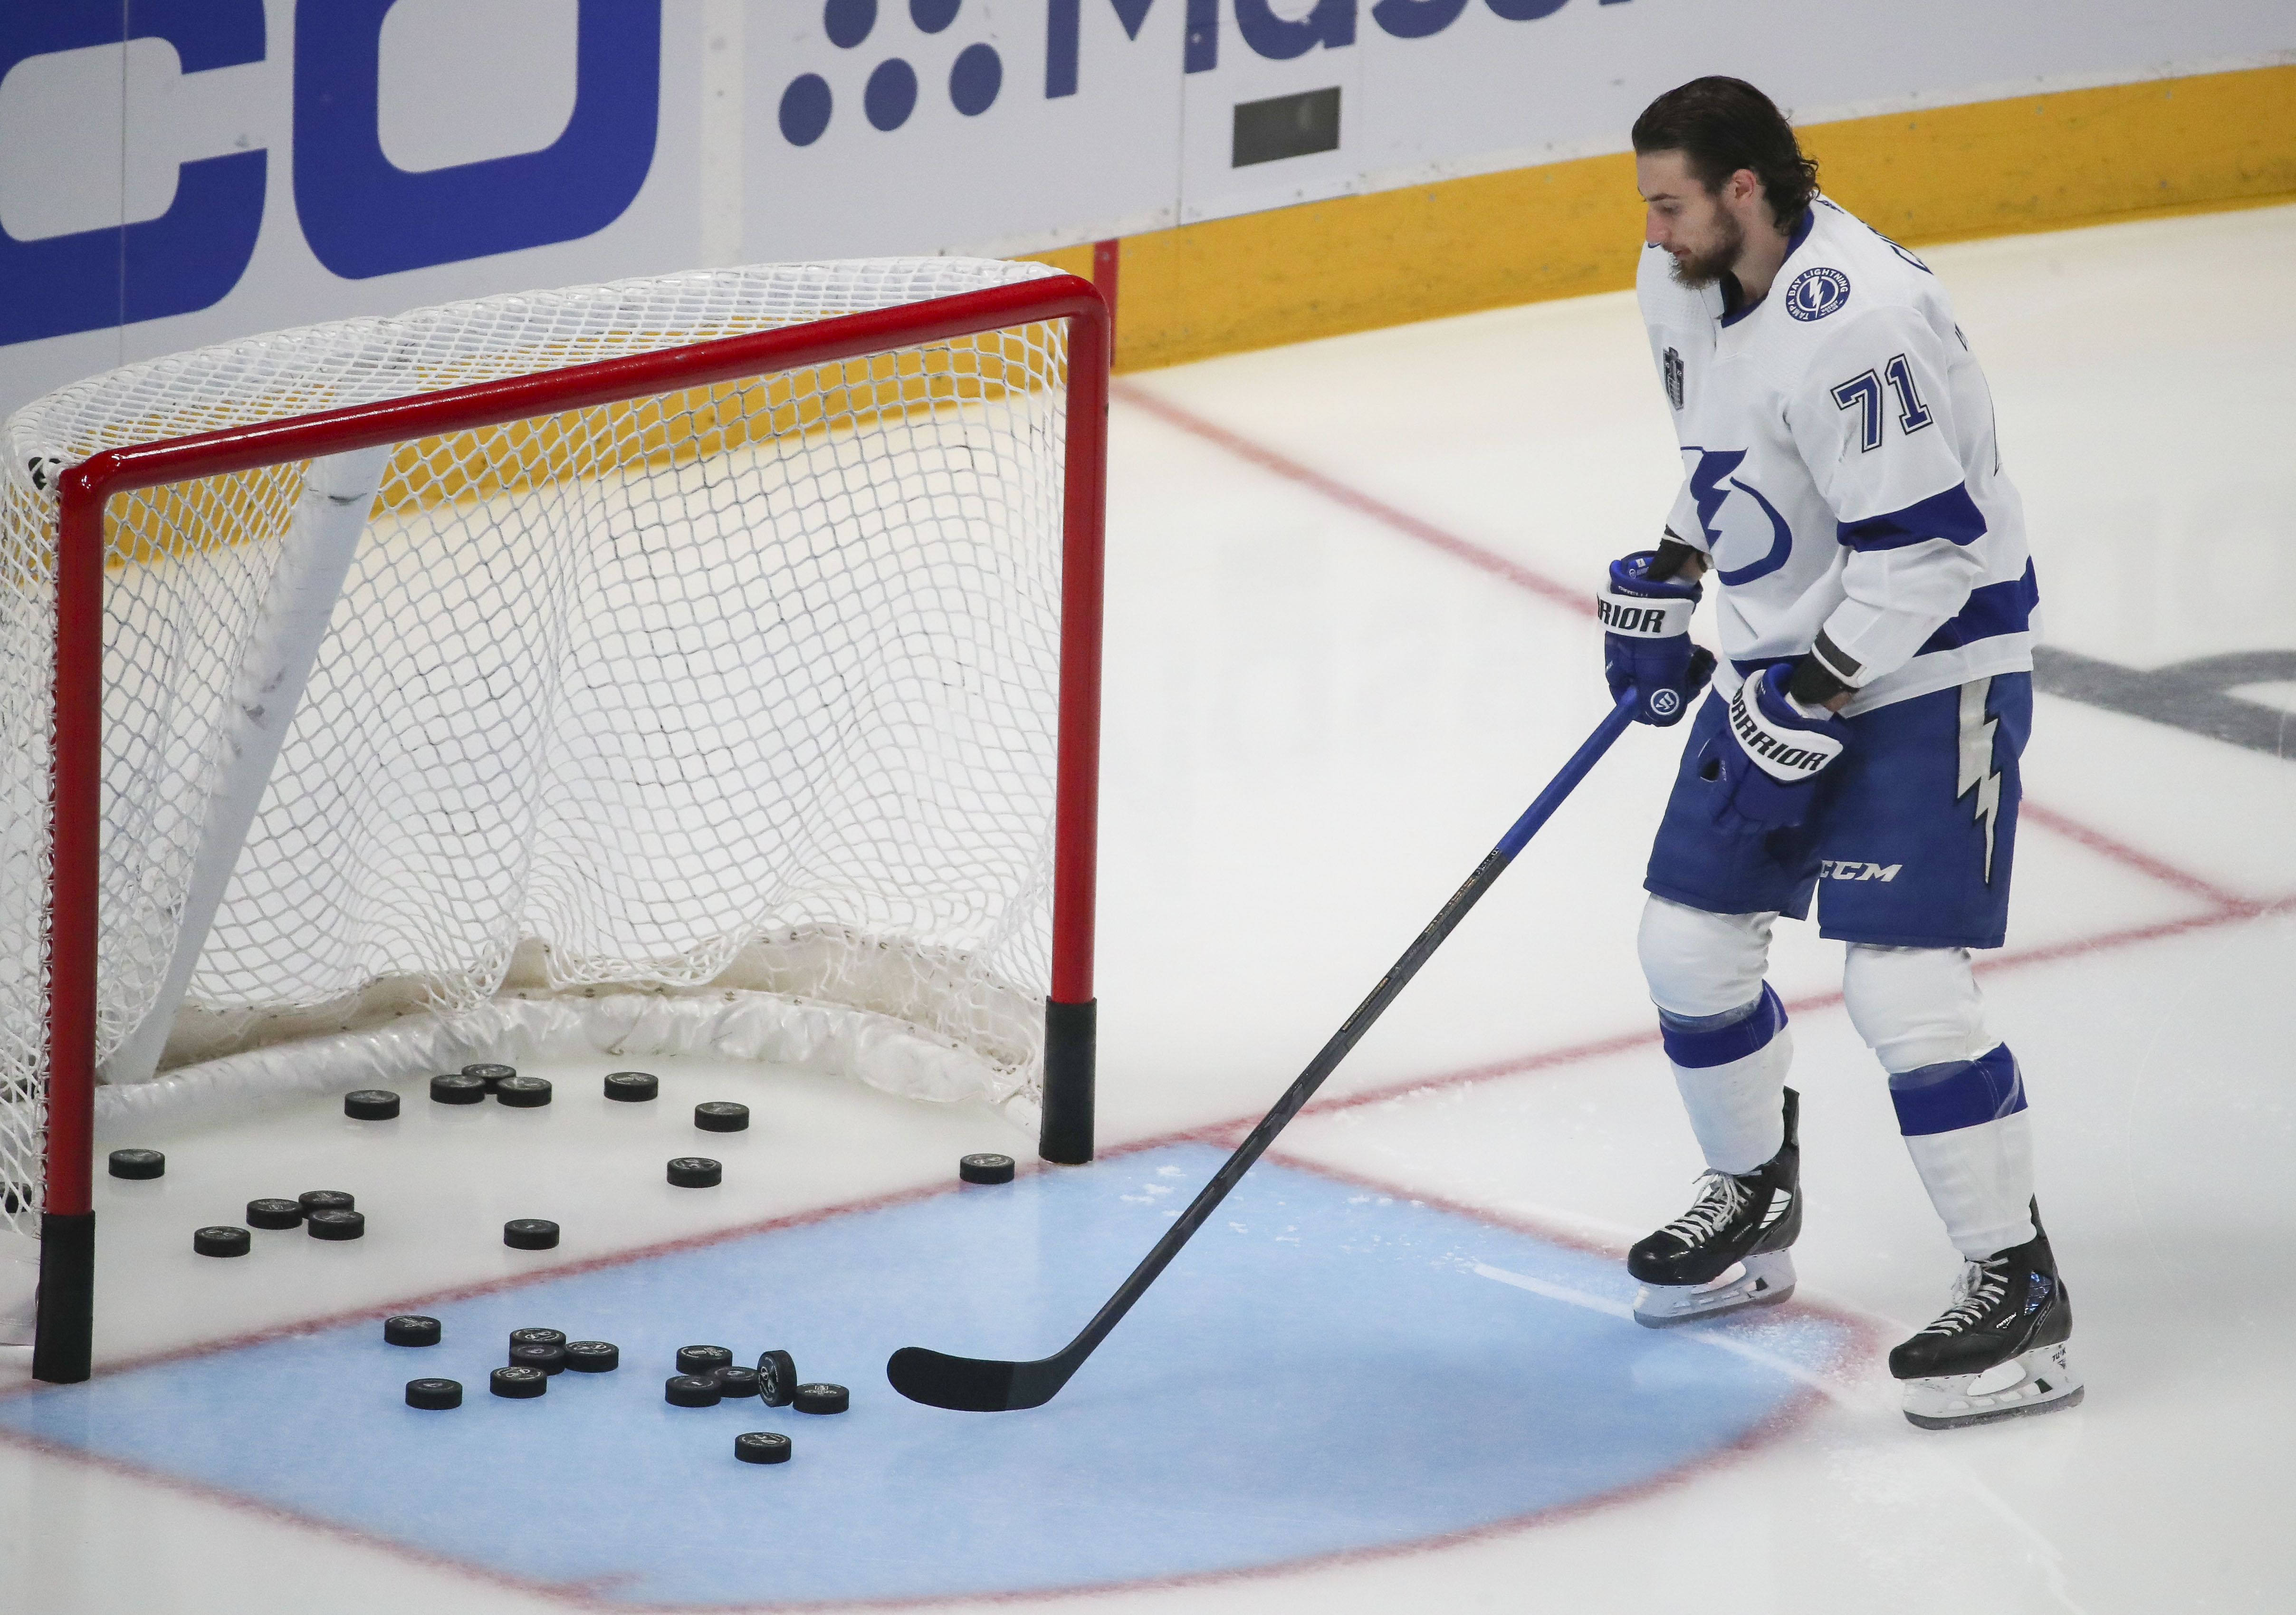 Ondrej Palat helps Bolts force Game 6 with clutch goal late in